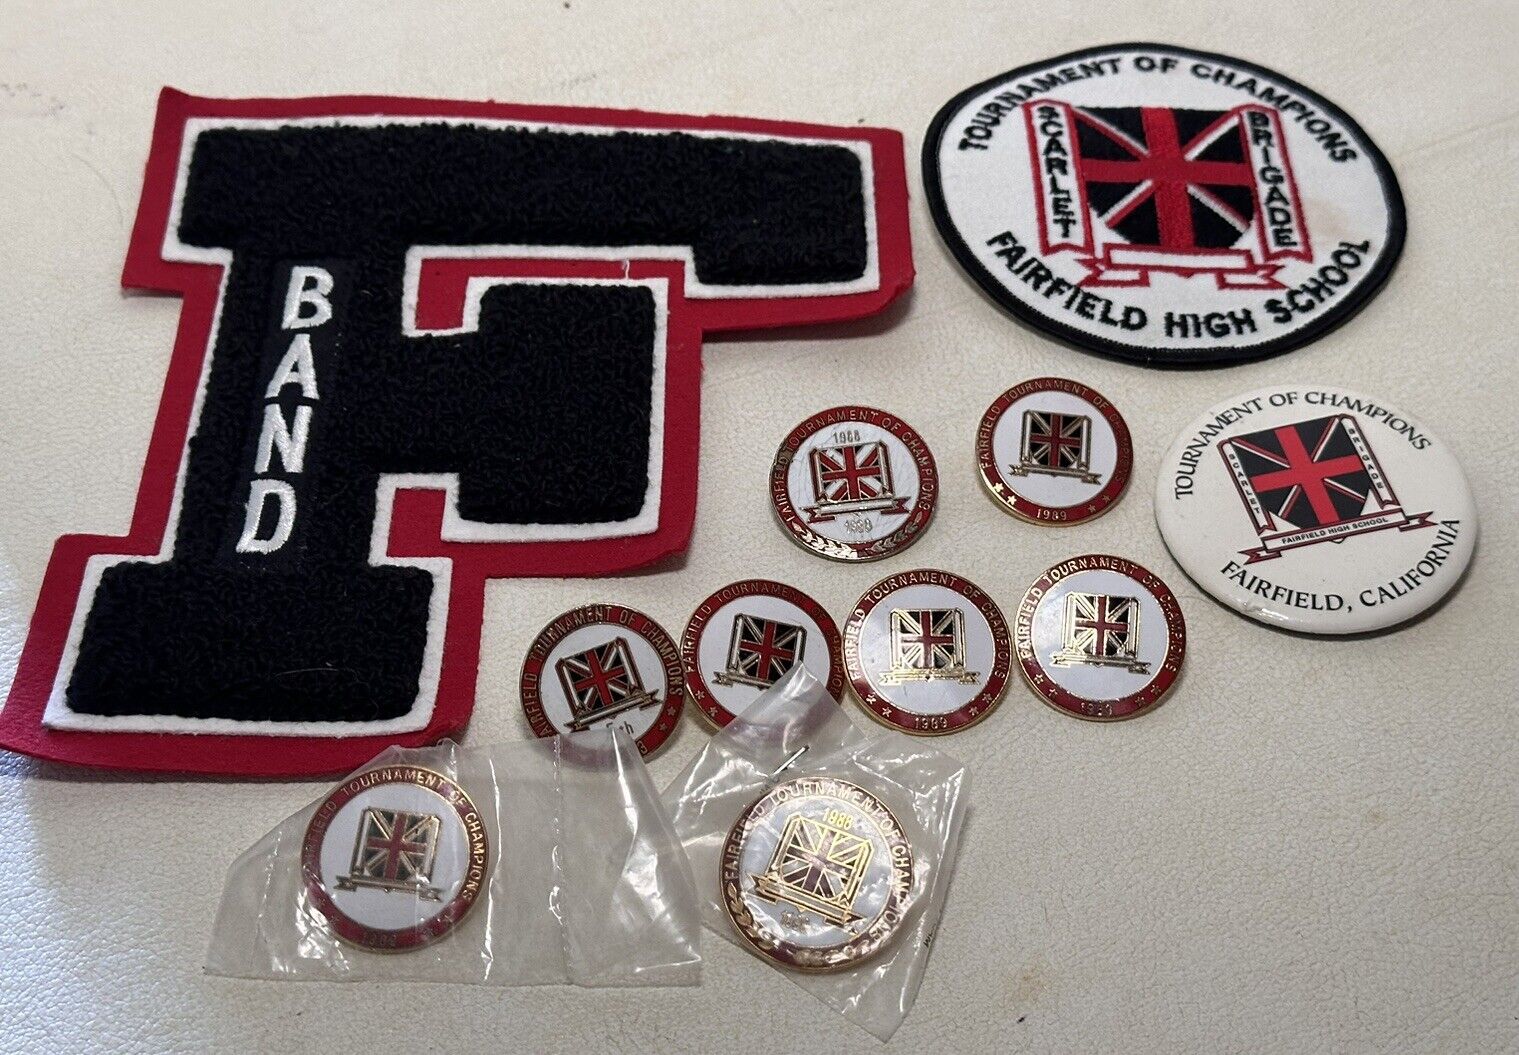 Fairfield High School Tournament Of Champions Lot Of Patches & Pinback Buttons